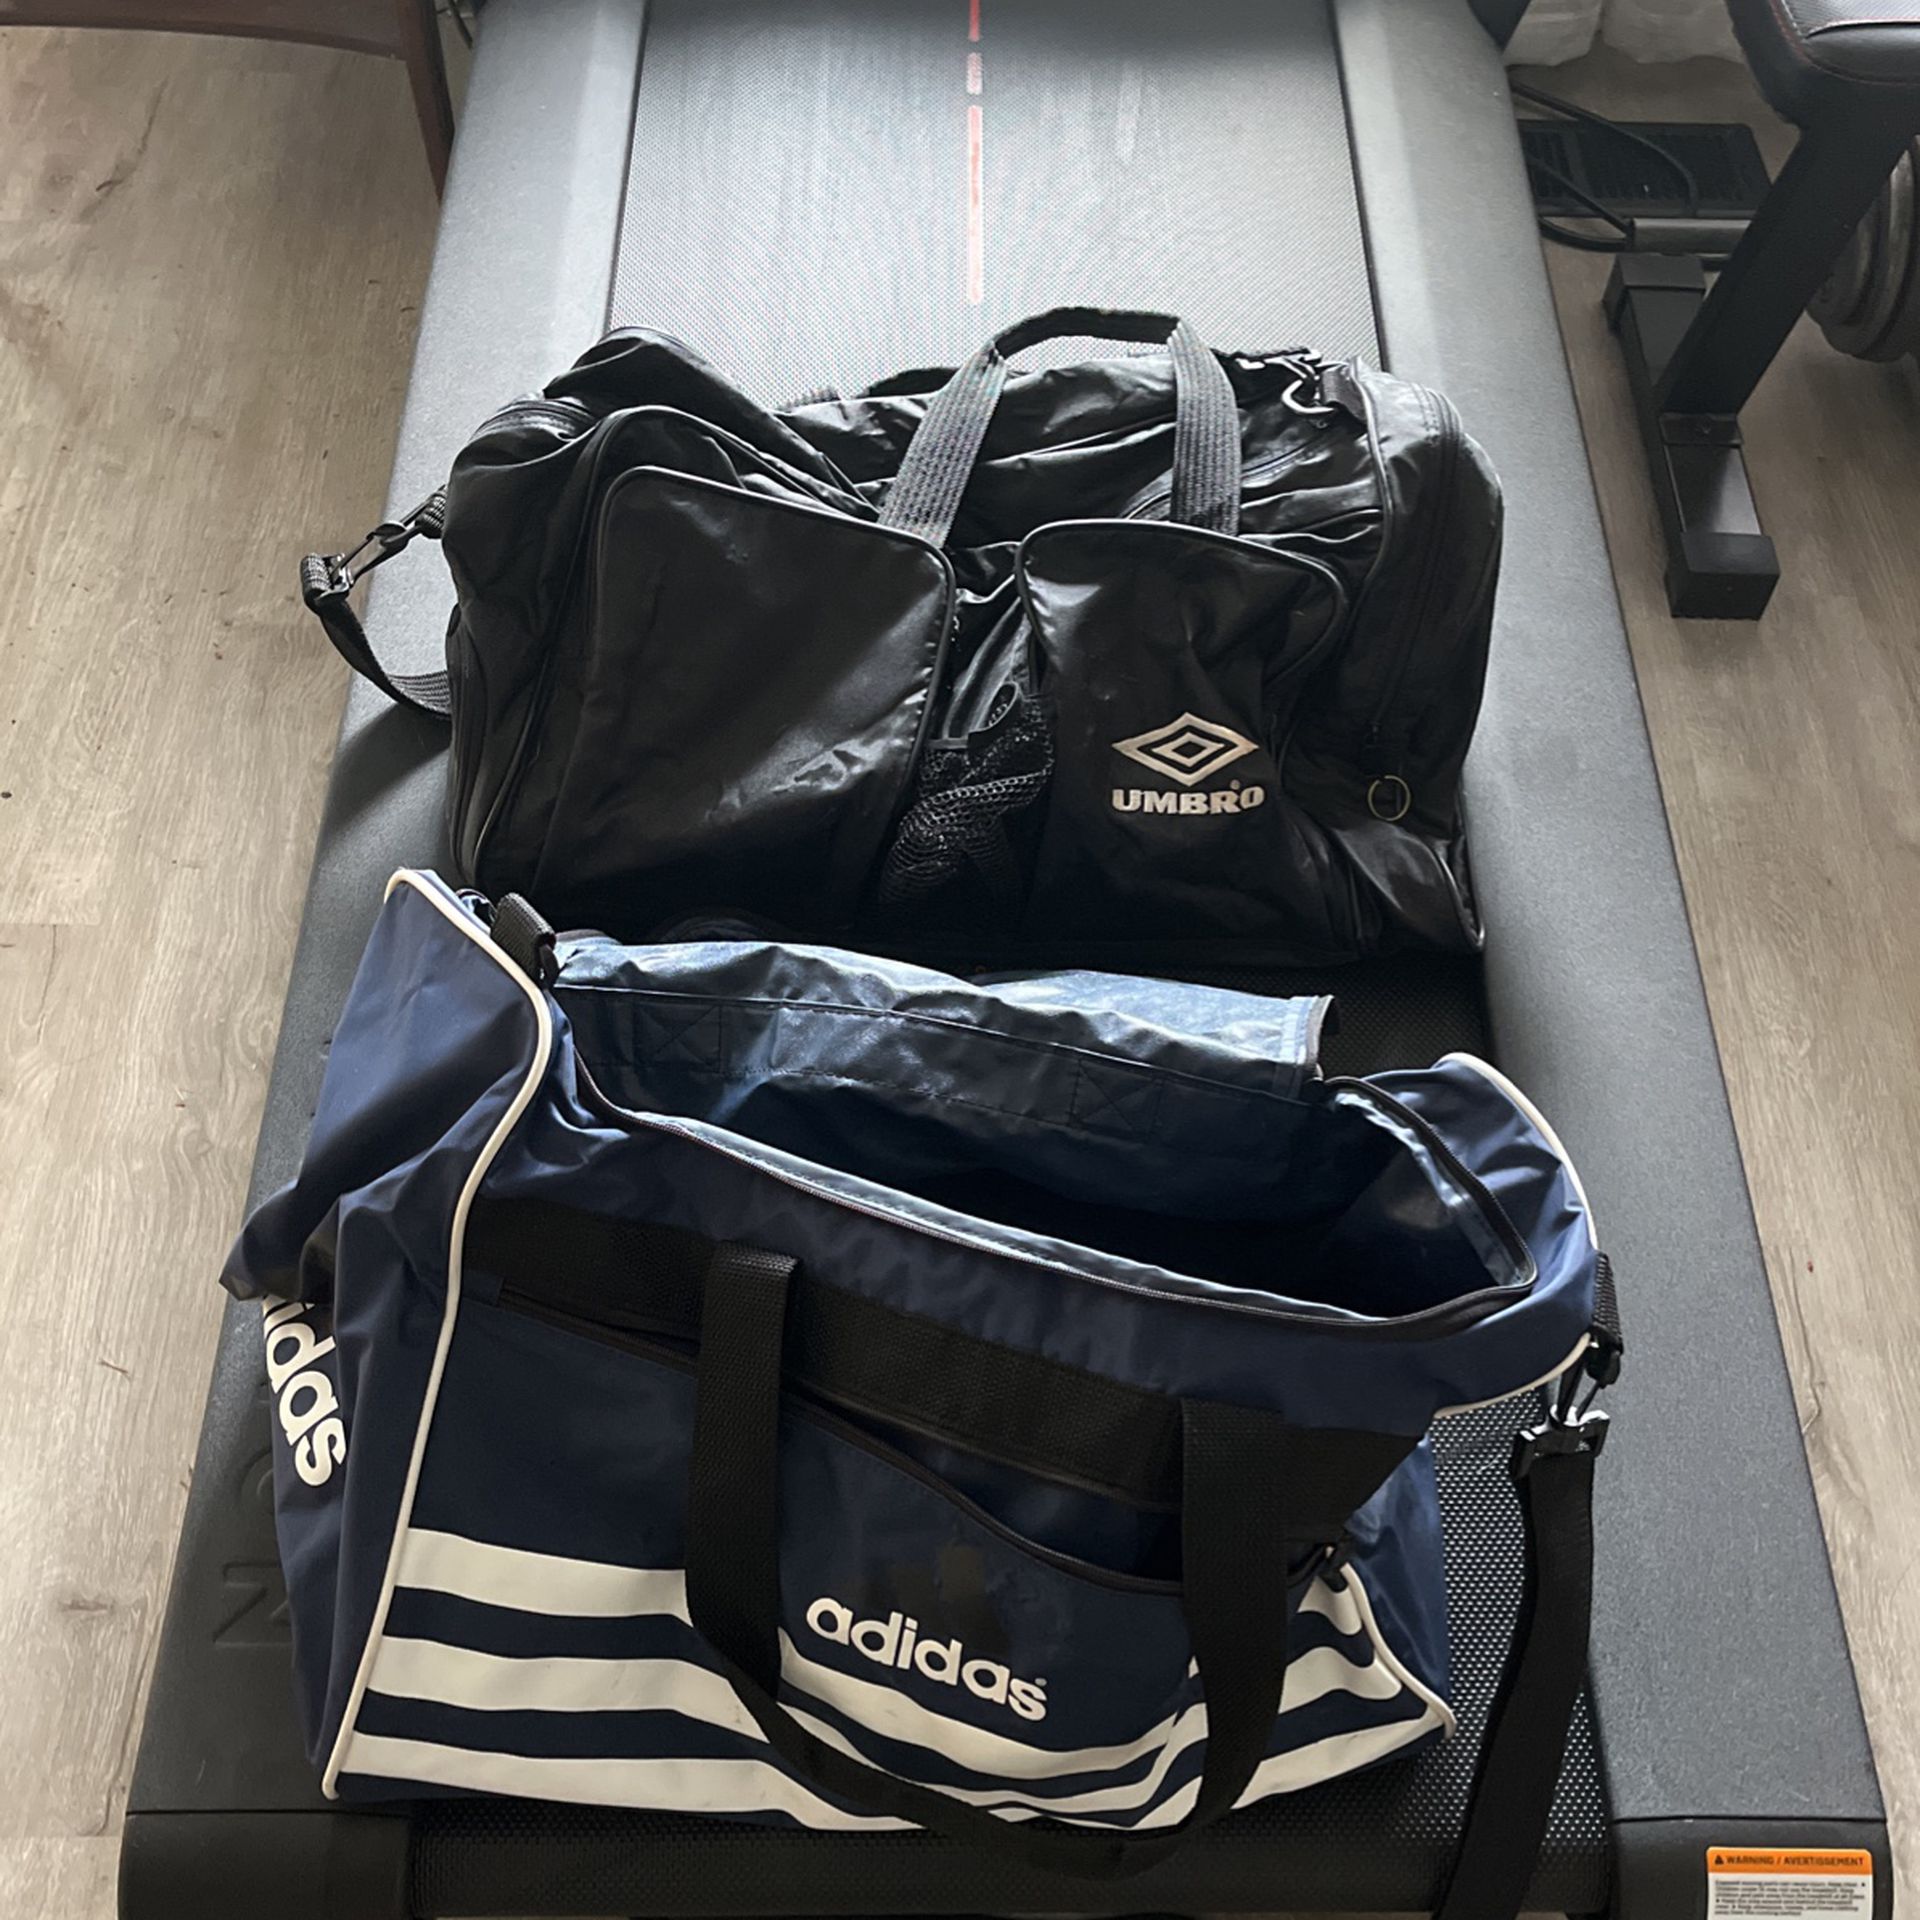 Sport/Duffle Bags - Umbro ($40) and Adidas ($40)